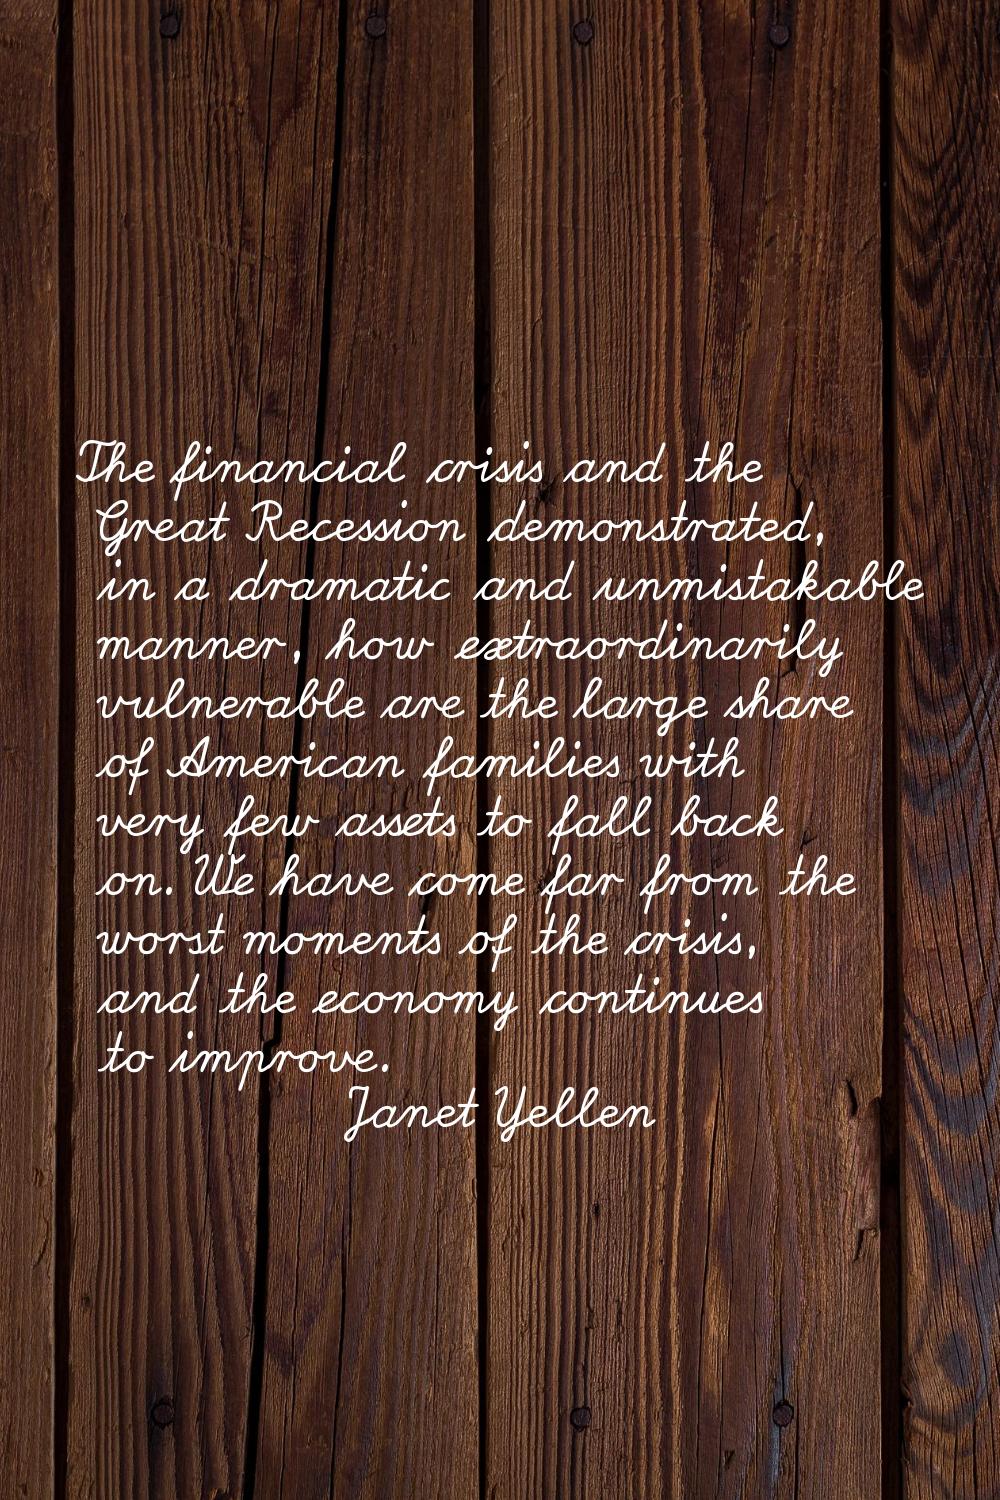 The financial crisis and the Great Recession demonstrated, in a dramatic and unmistakable manner, h